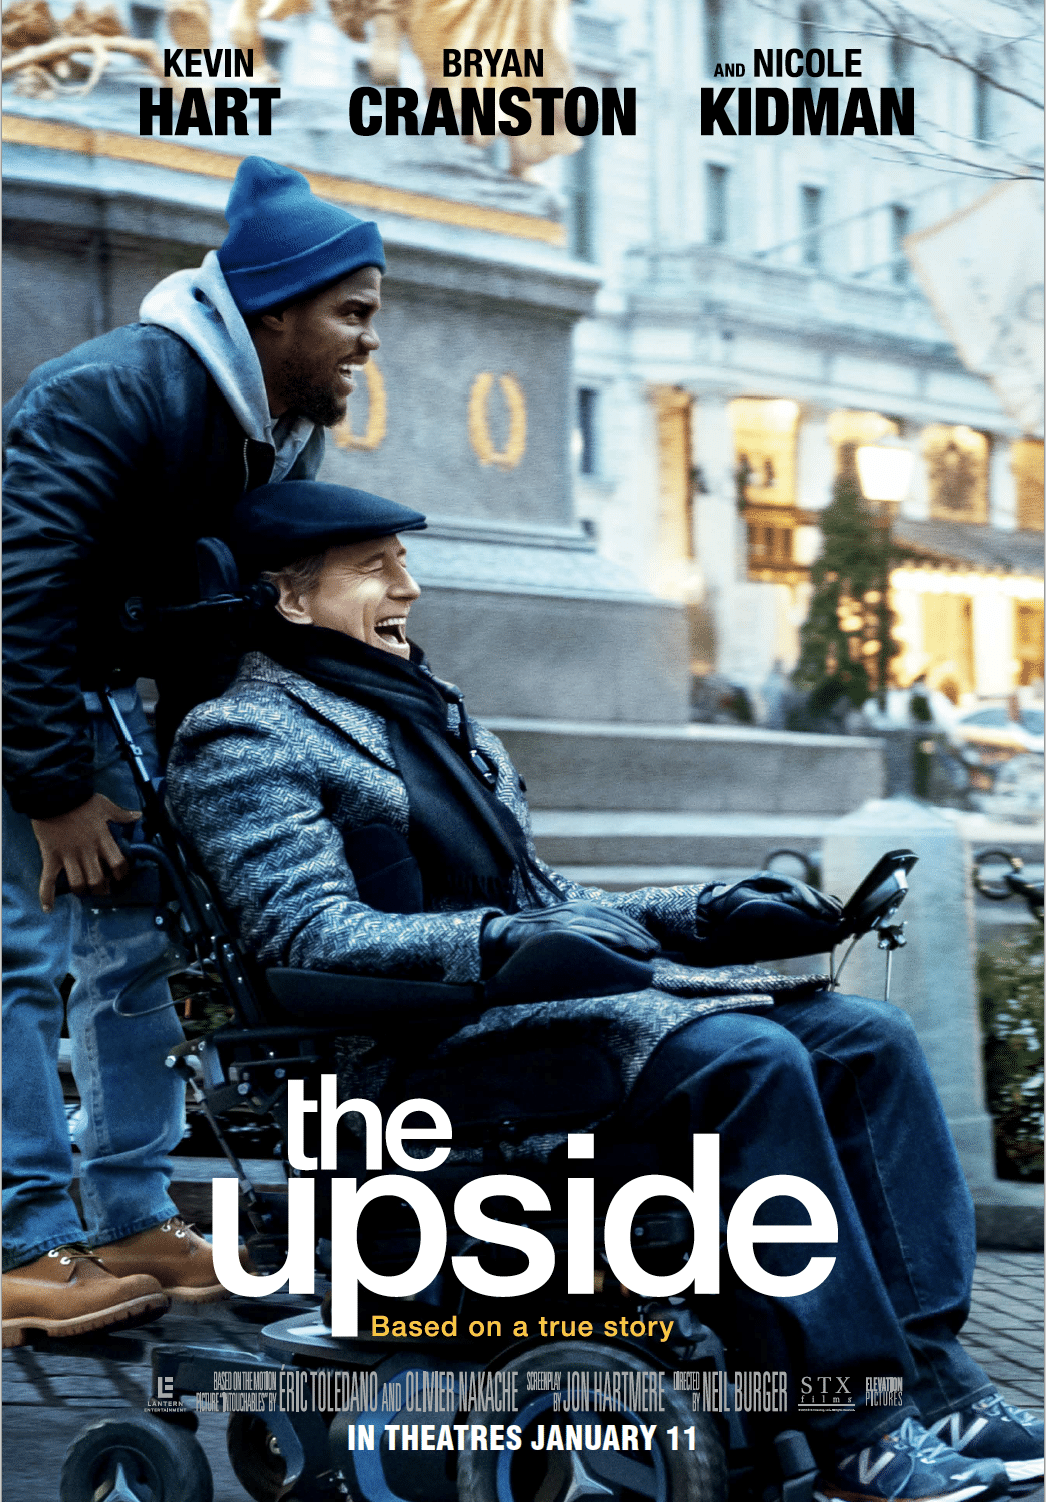 CONTEST: Win Passes to see an Advance Screening of The Upside